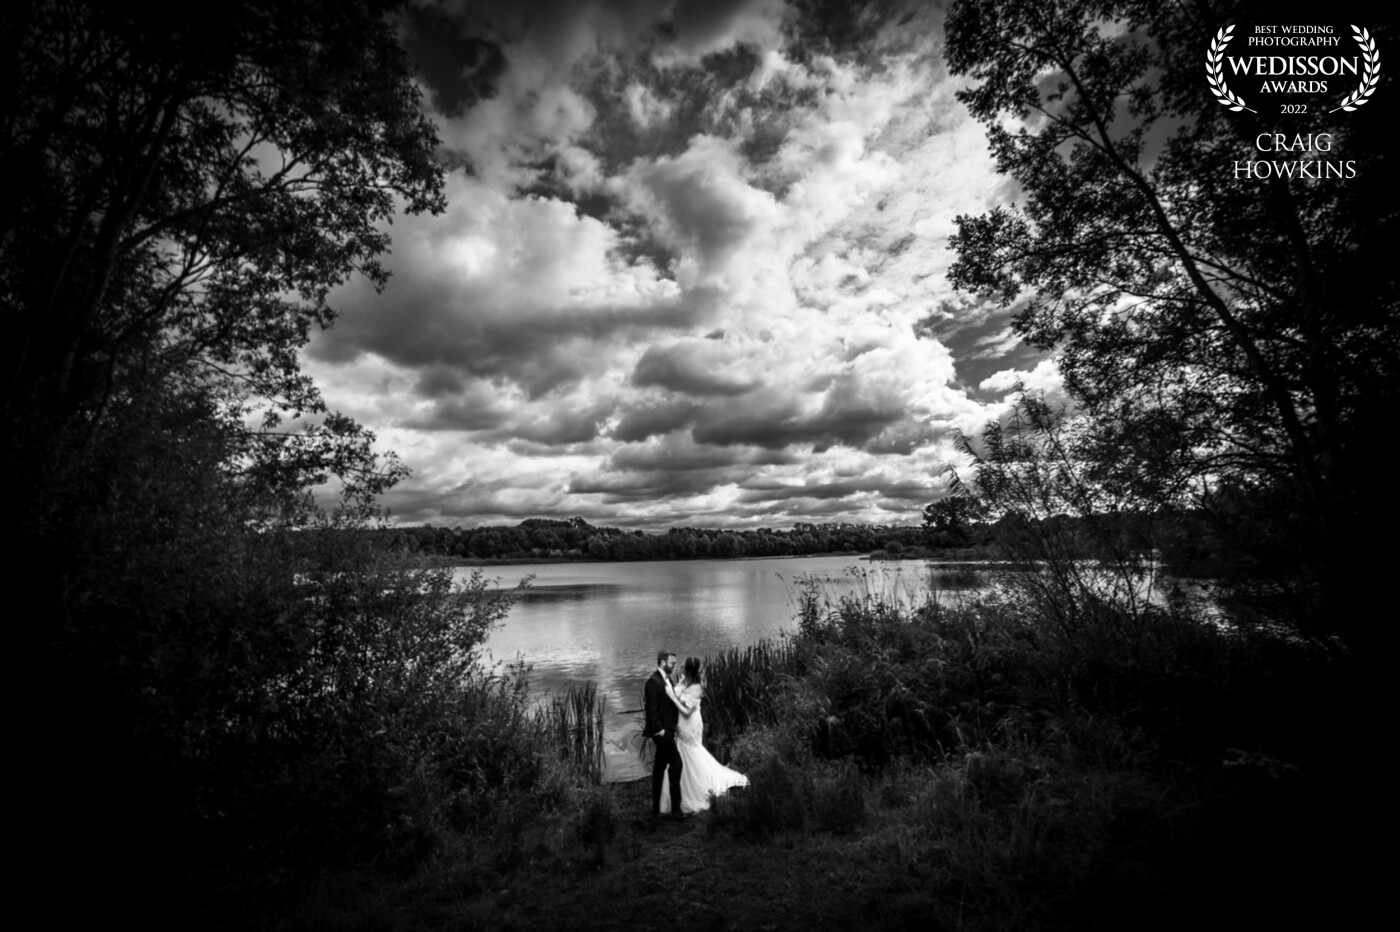 I love this shot! This image was taken at Stanwick Lakes in Northamptonshire. I love it when I can have so much creative fun with my clients. We had the perfect sky and with the trees framing the couple. I just put a wide angle 14mm lens on and we got this epic shot!